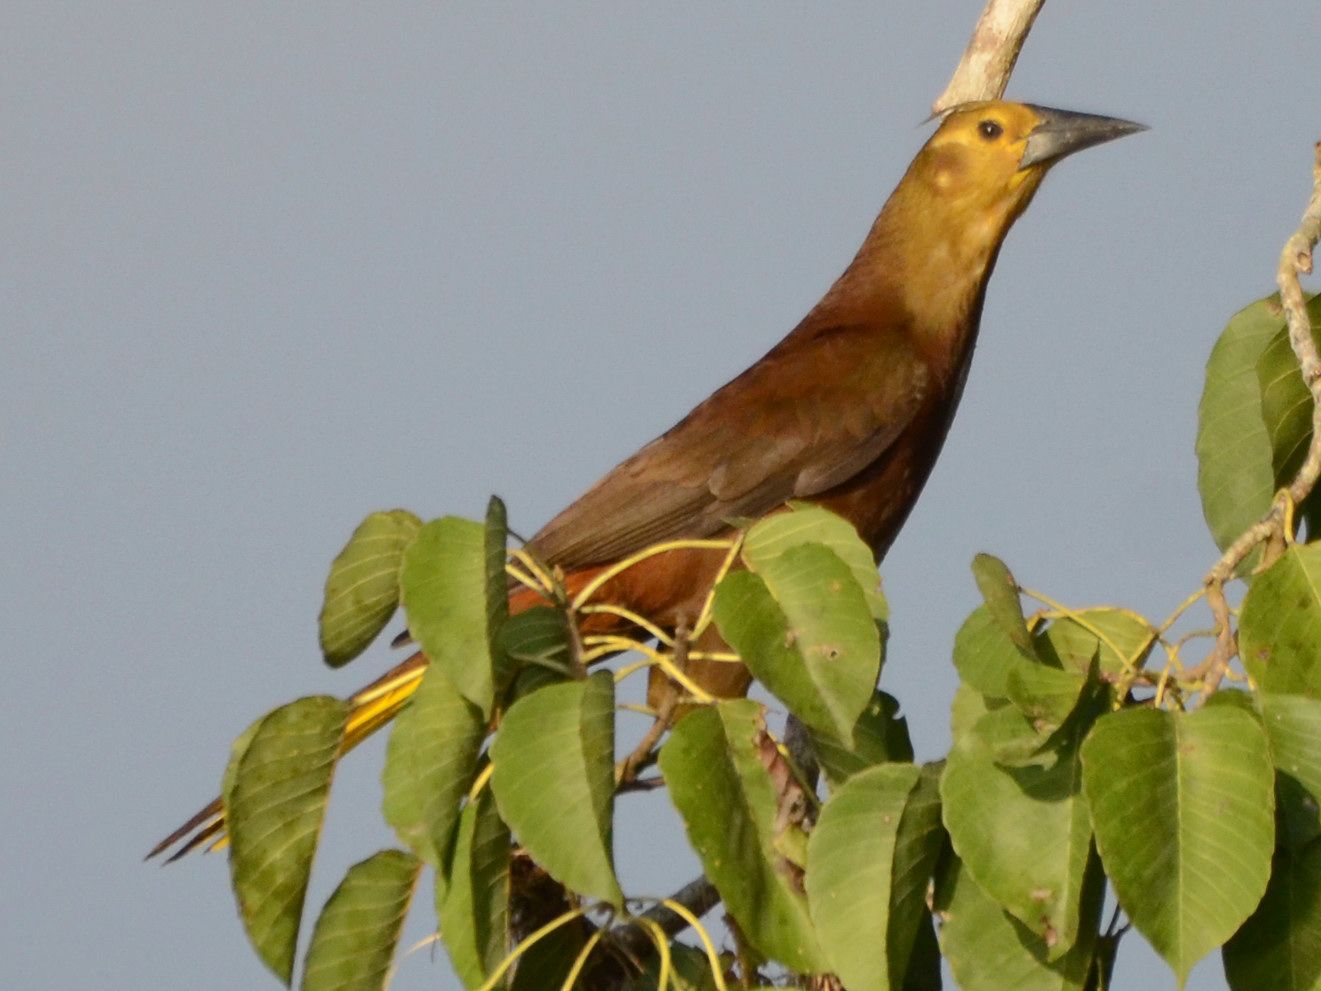 Click picture to see more Russet-backed Oropendolas.